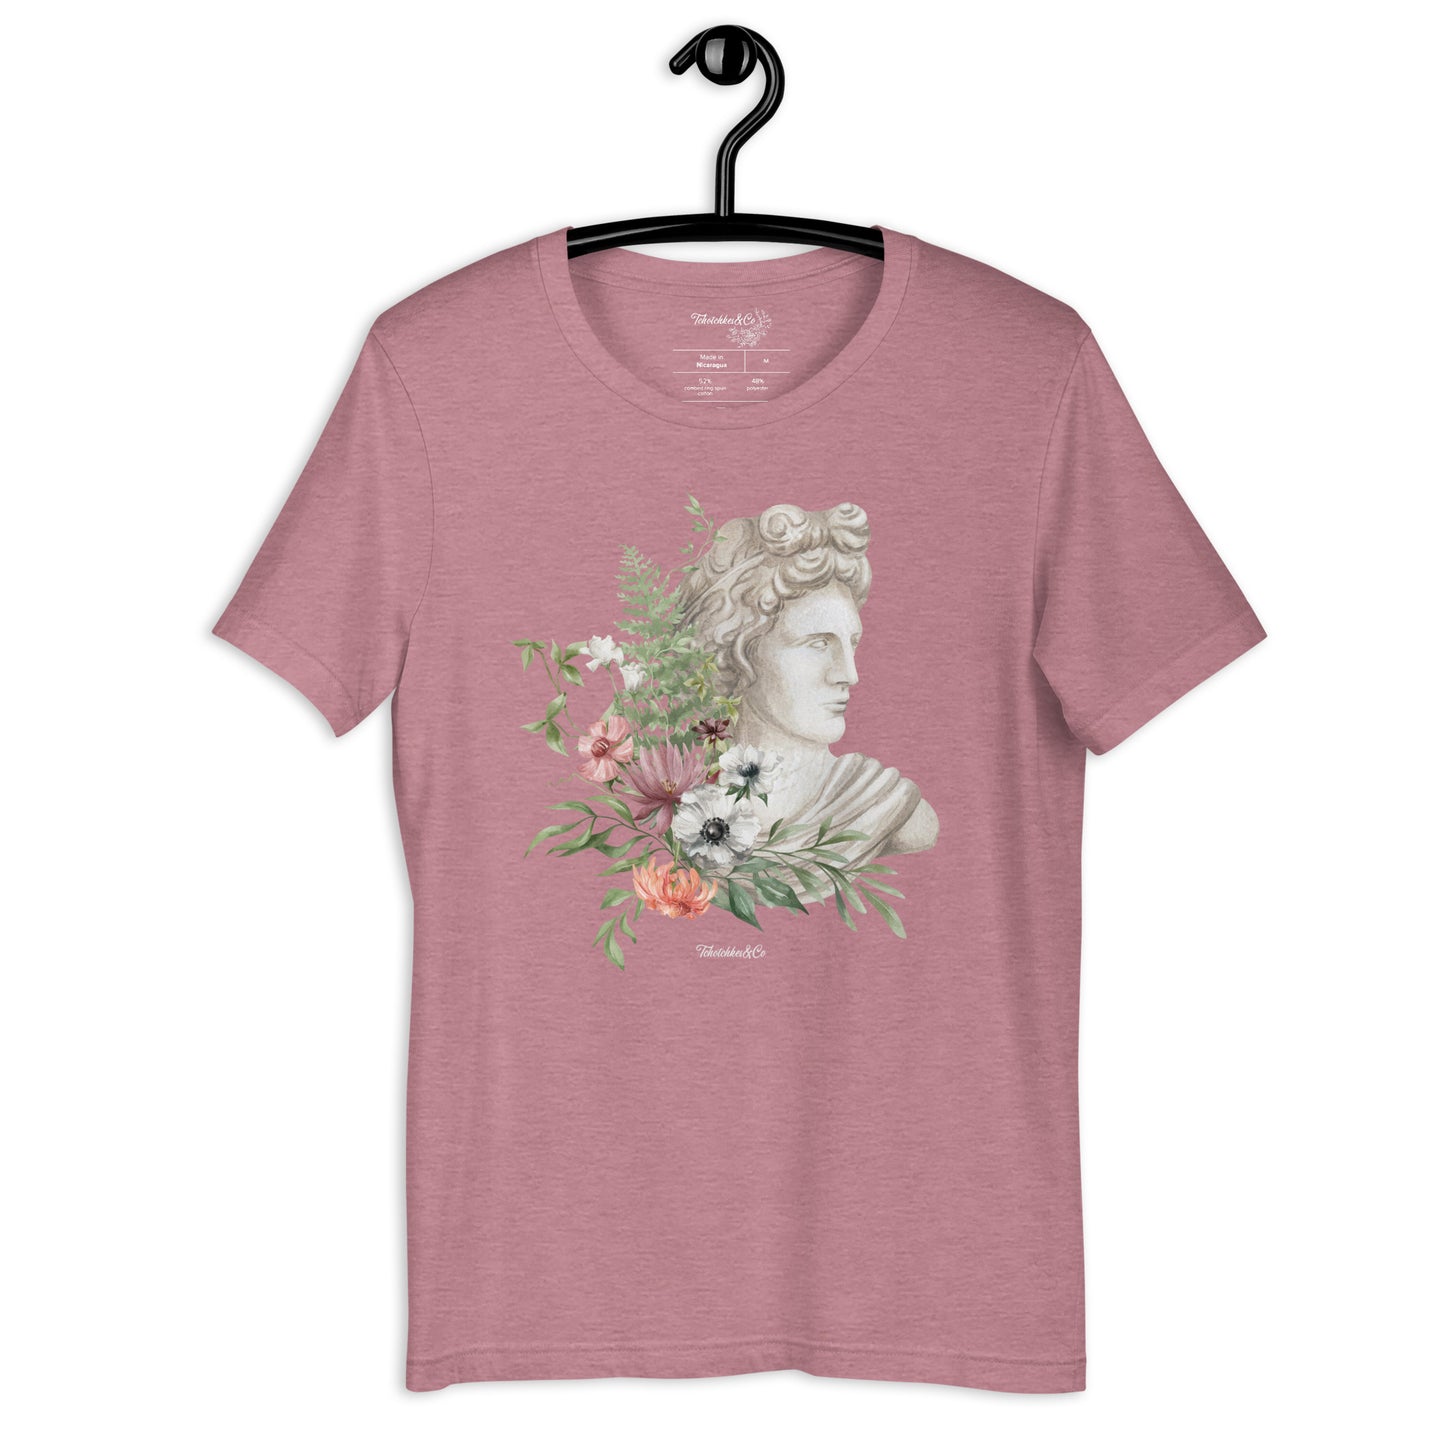 Floral Statue Dark and Light Academia Aesthetic Unisex T-Shirt